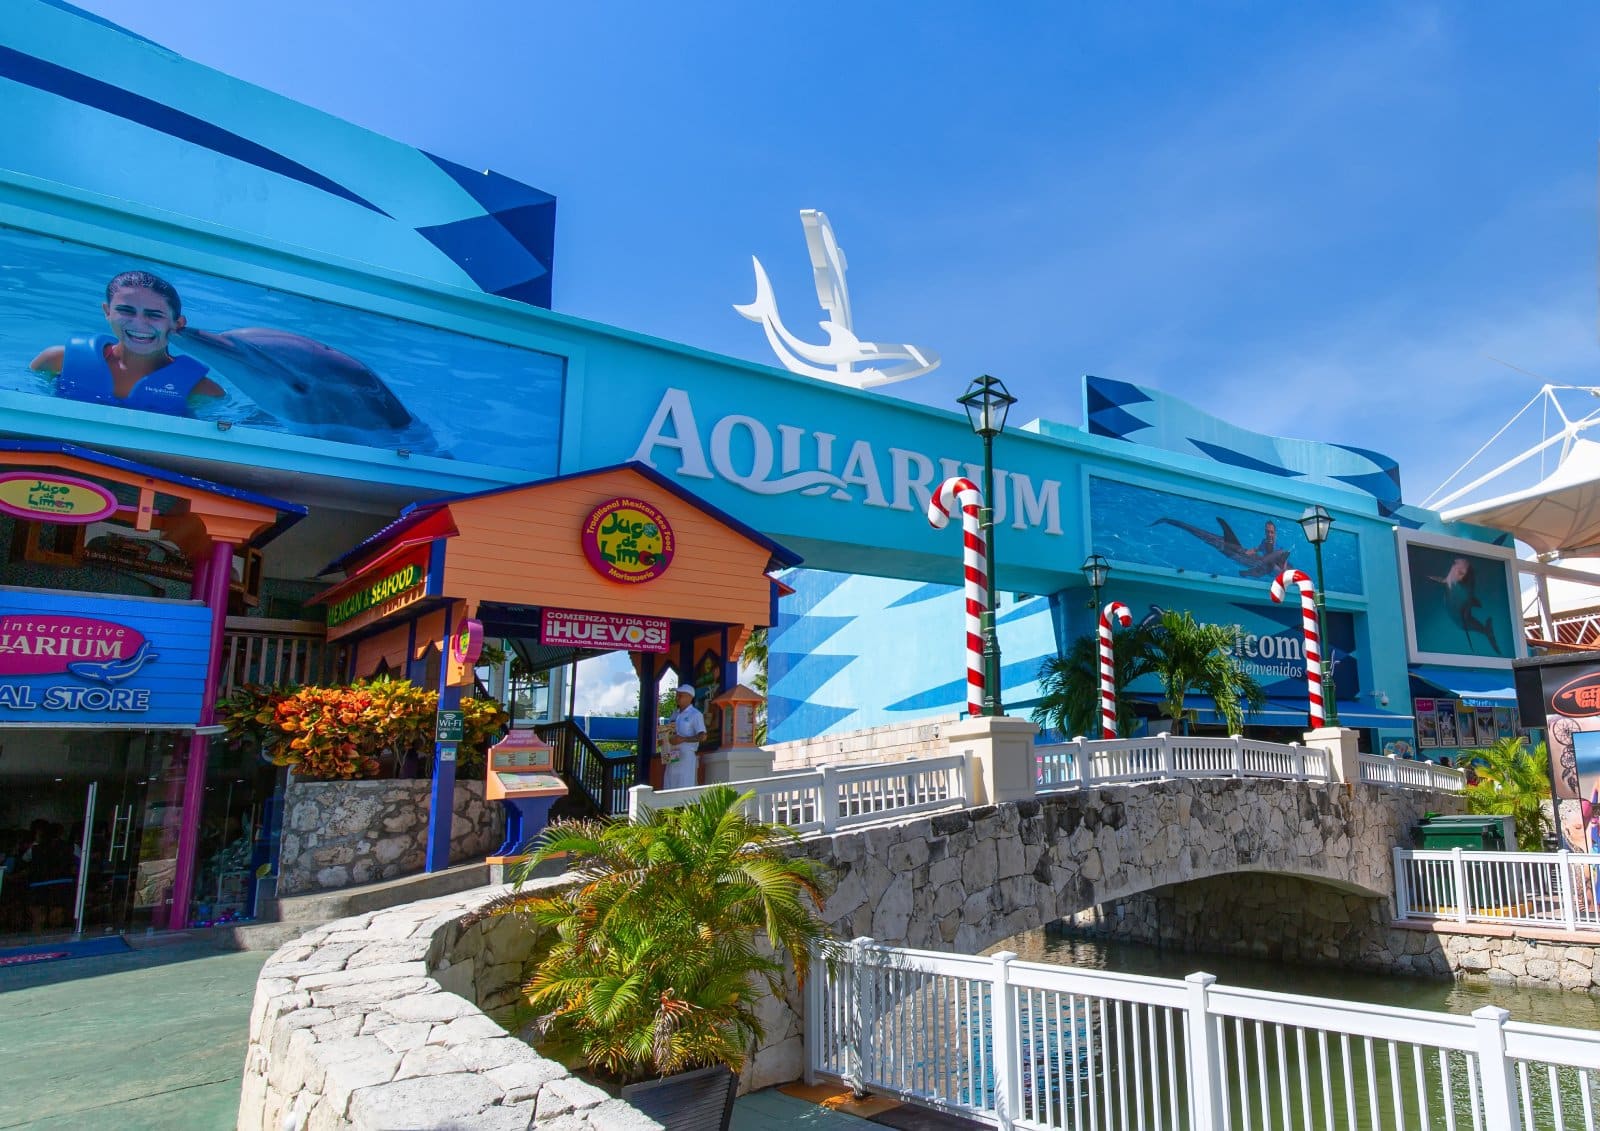 <p><span>The Interactive Aquarium in Cancún offers an up-close experience with marine life, including opportunities to swim with dolphins and feed sharks. It’s an educational and fun experience for all ages, showcasing a variety of aquatic species and conservation efforts.</span></p> <p><b>Insider’s Tip : </b><span>Consider the dolphin swim experience for a memorable interaction with these intelligent creatures.</span></p> <p><b>How To Get There: </b><span>The aquarium is located in La Isla Shopping Village in the hotel zone.</span></p> <p><b>Best Time To Travel: </b><span>Visit on a weekday to avoid the weekend crowds.</span></p>